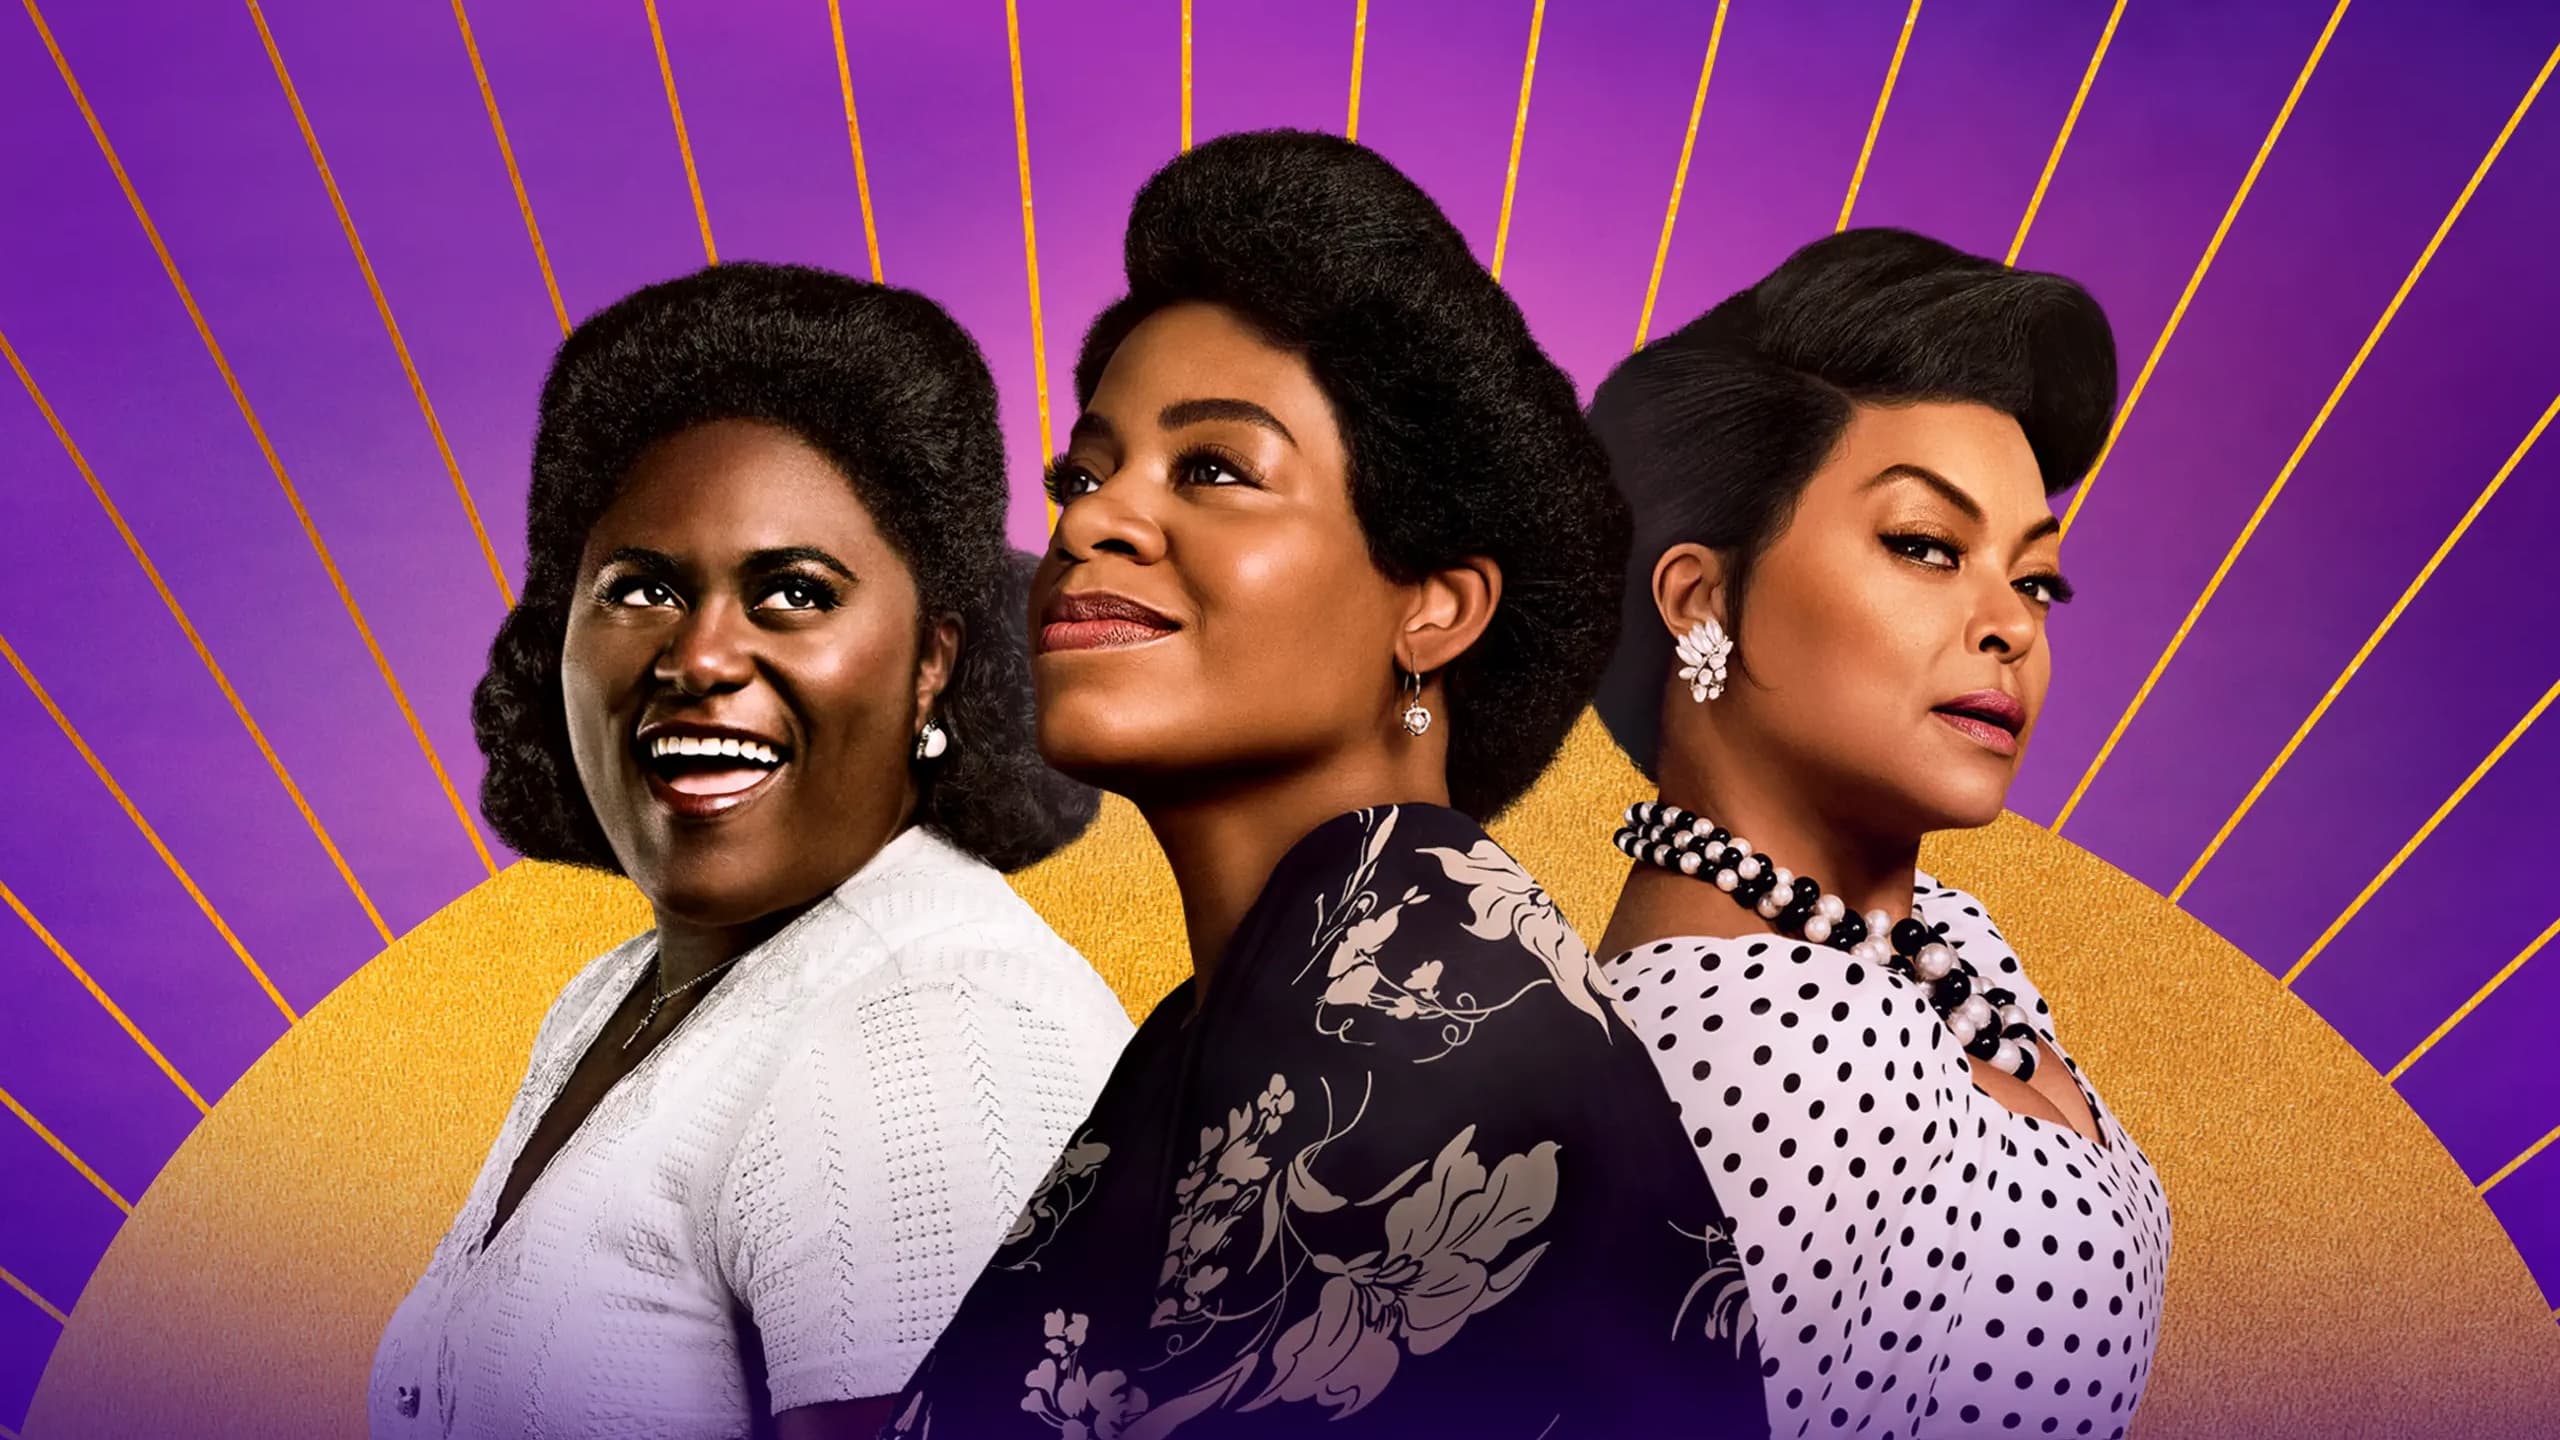 A graphic featuring a trio of women (Danielle Brooks, Fantasia Barrino, and Taraji P. Henson) front-center in front of a purple backdrop with a yellow sunburst